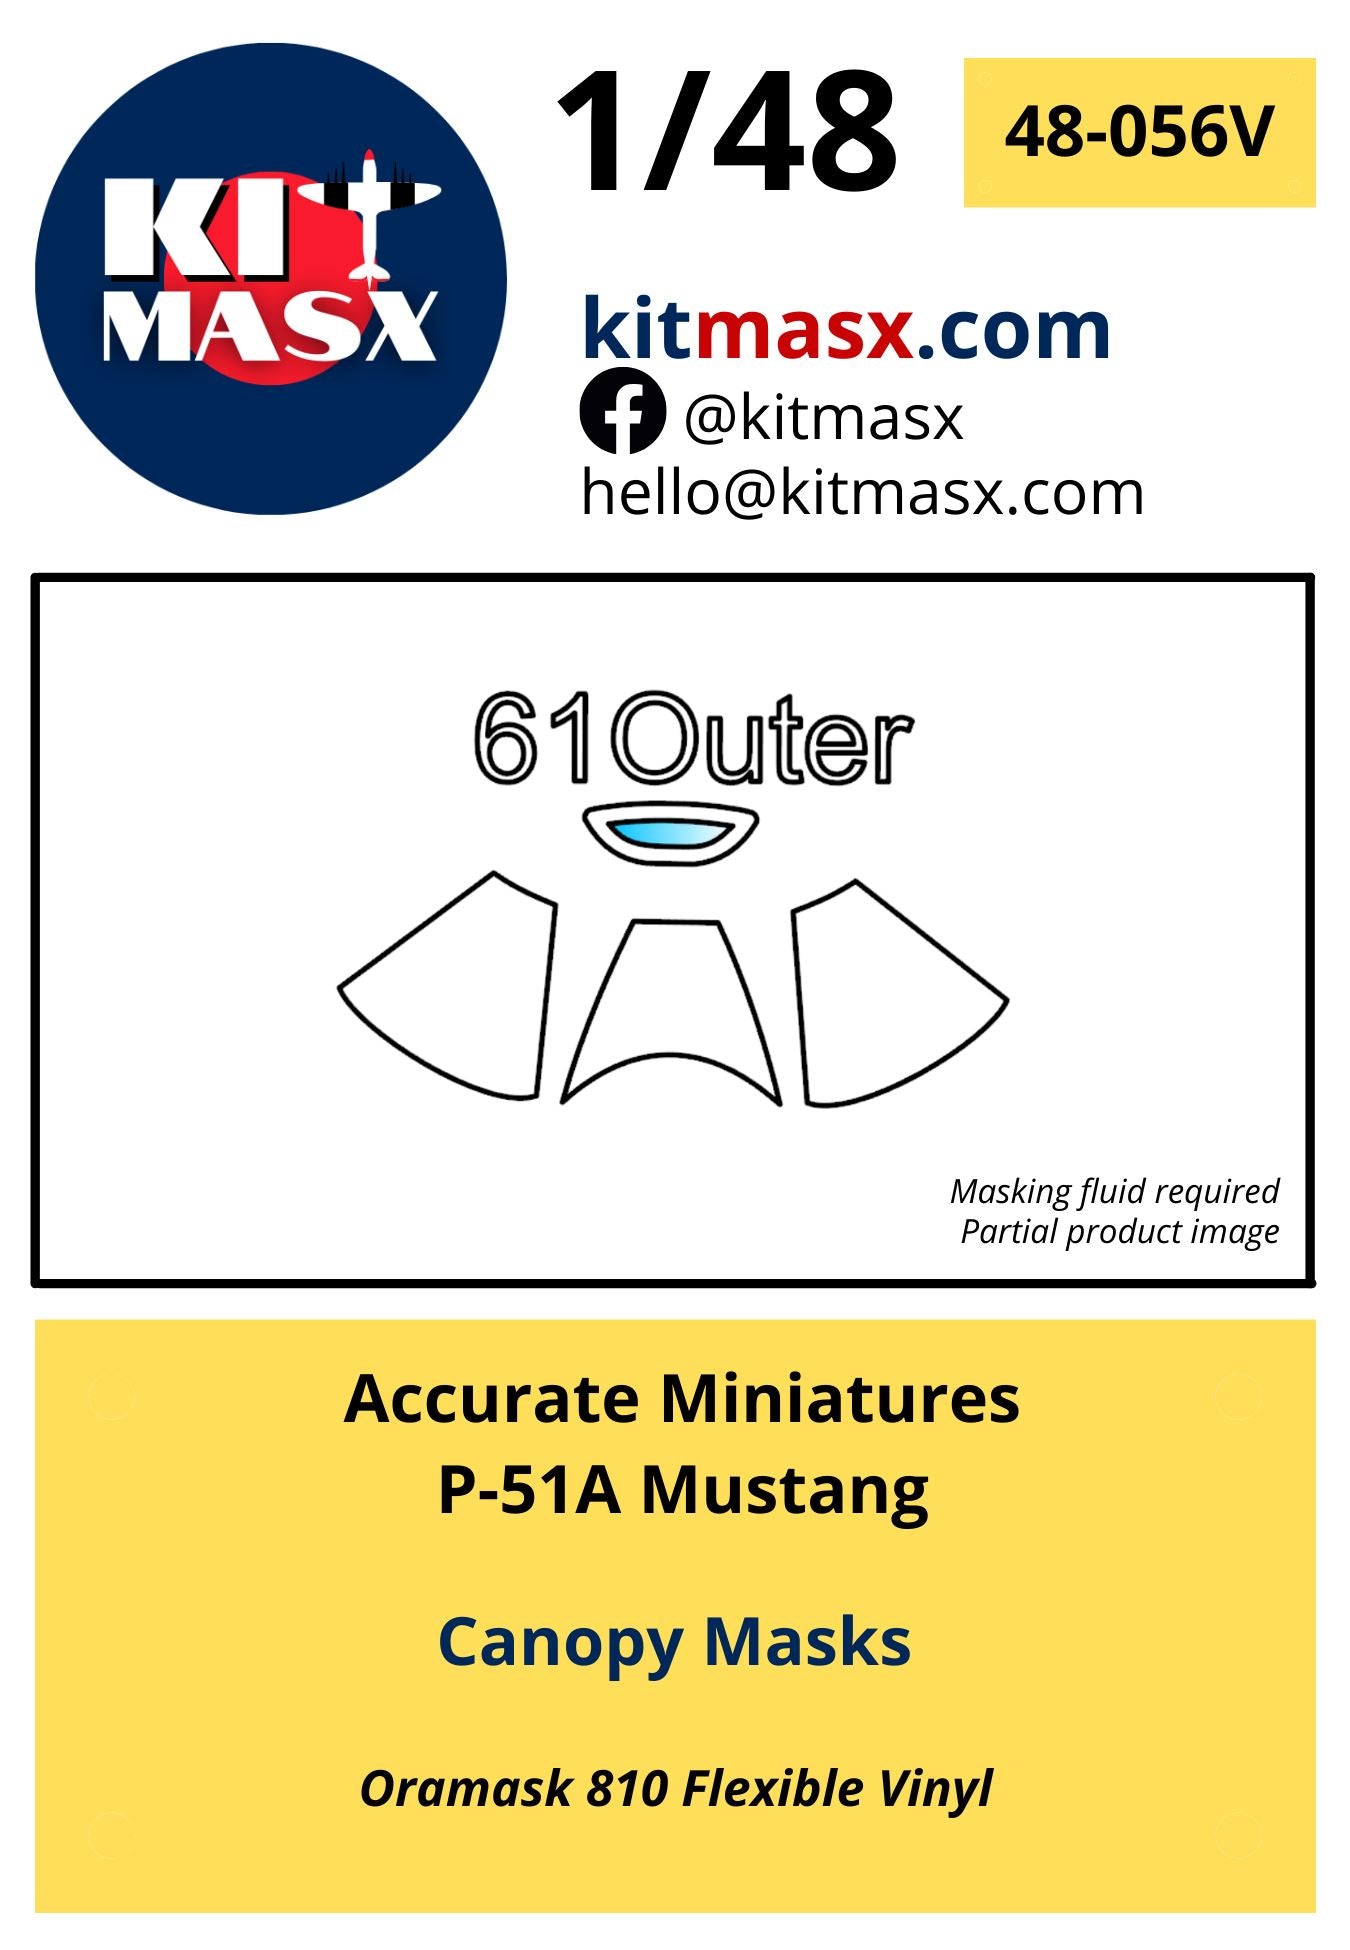 Accurate Miniatures P-51A Mustang Canopy Masks Kit Masx 